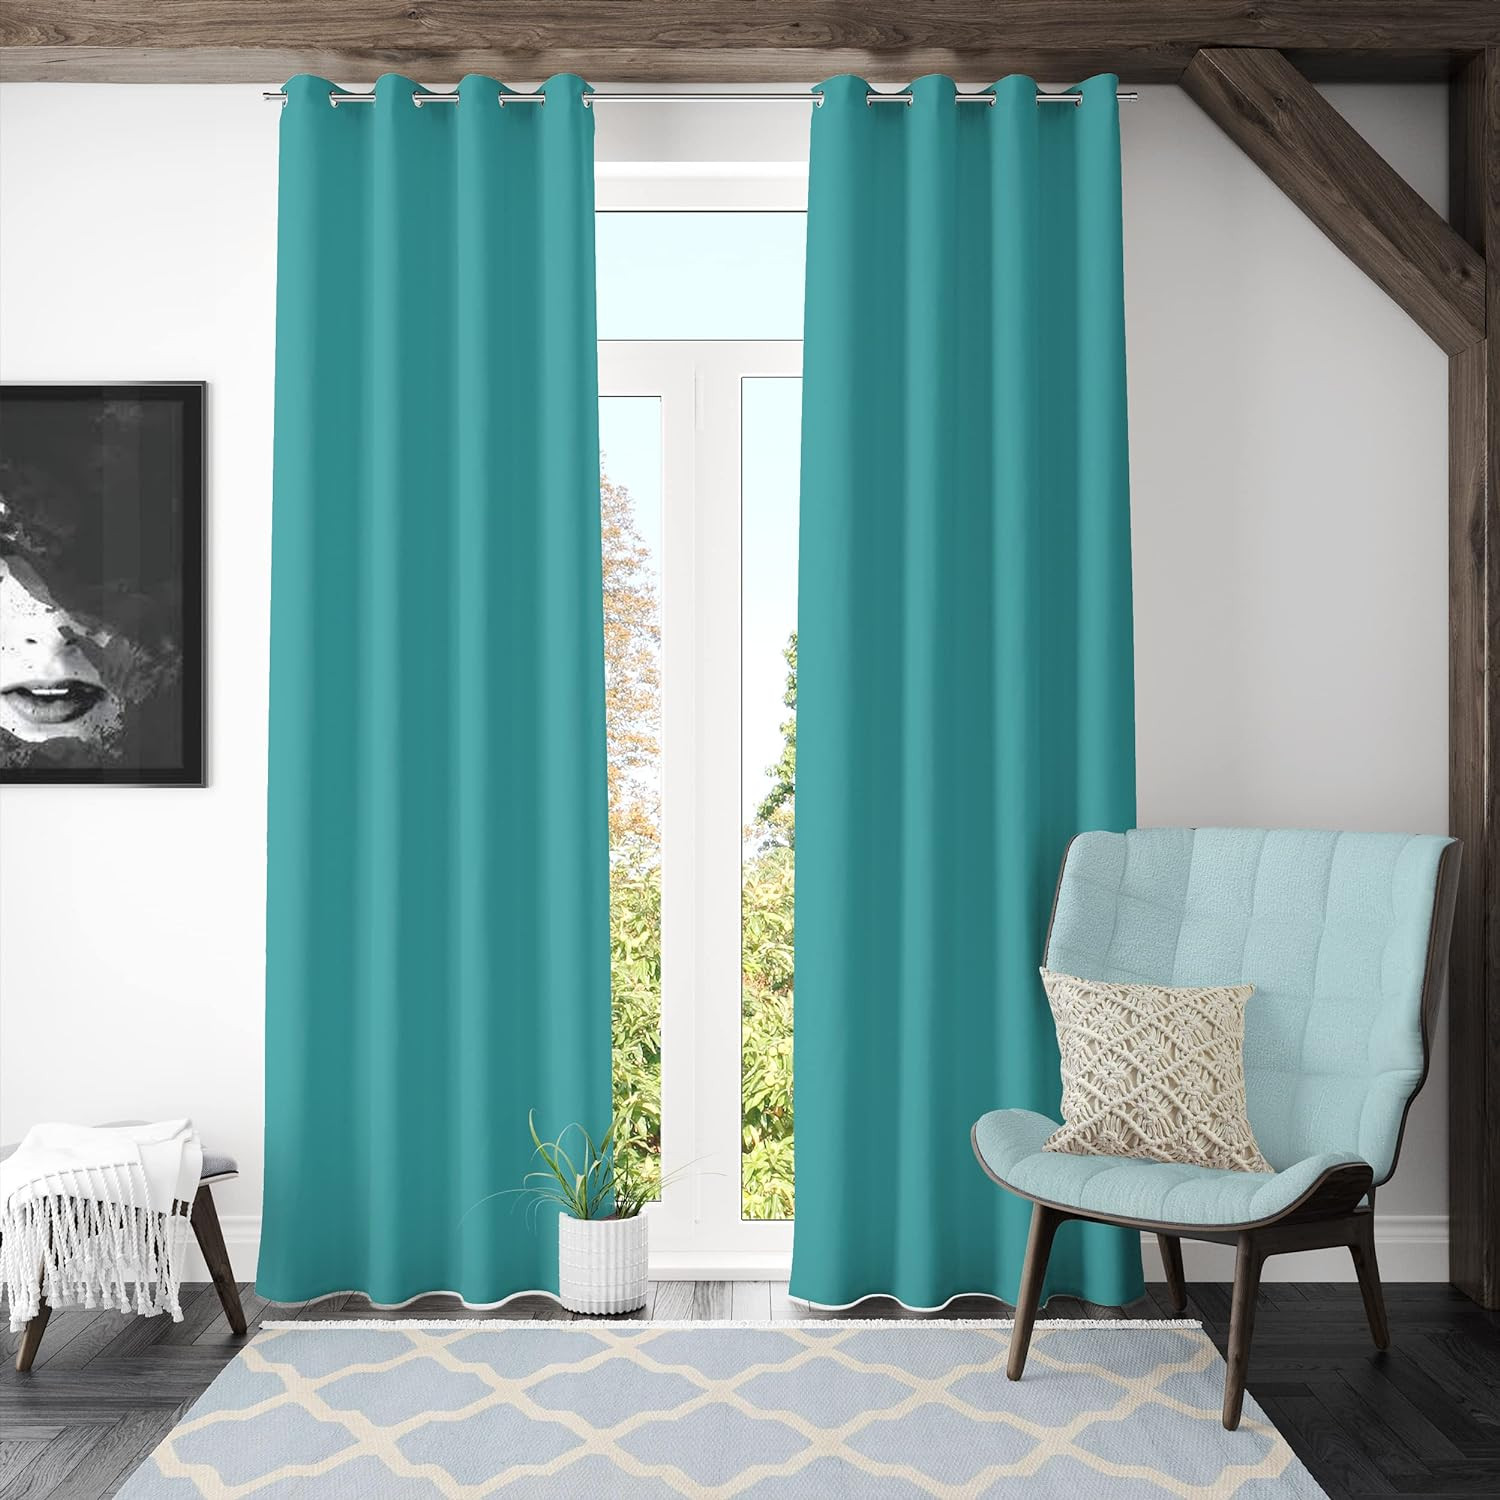 Kuber Industries 100% Room Darkening Black Out Curtain I 5 Feet Window Curtain I Insulated Heavy Polyester Solid Curtain|Drapes with 8 Eyelet for Home & Office (Aqua)